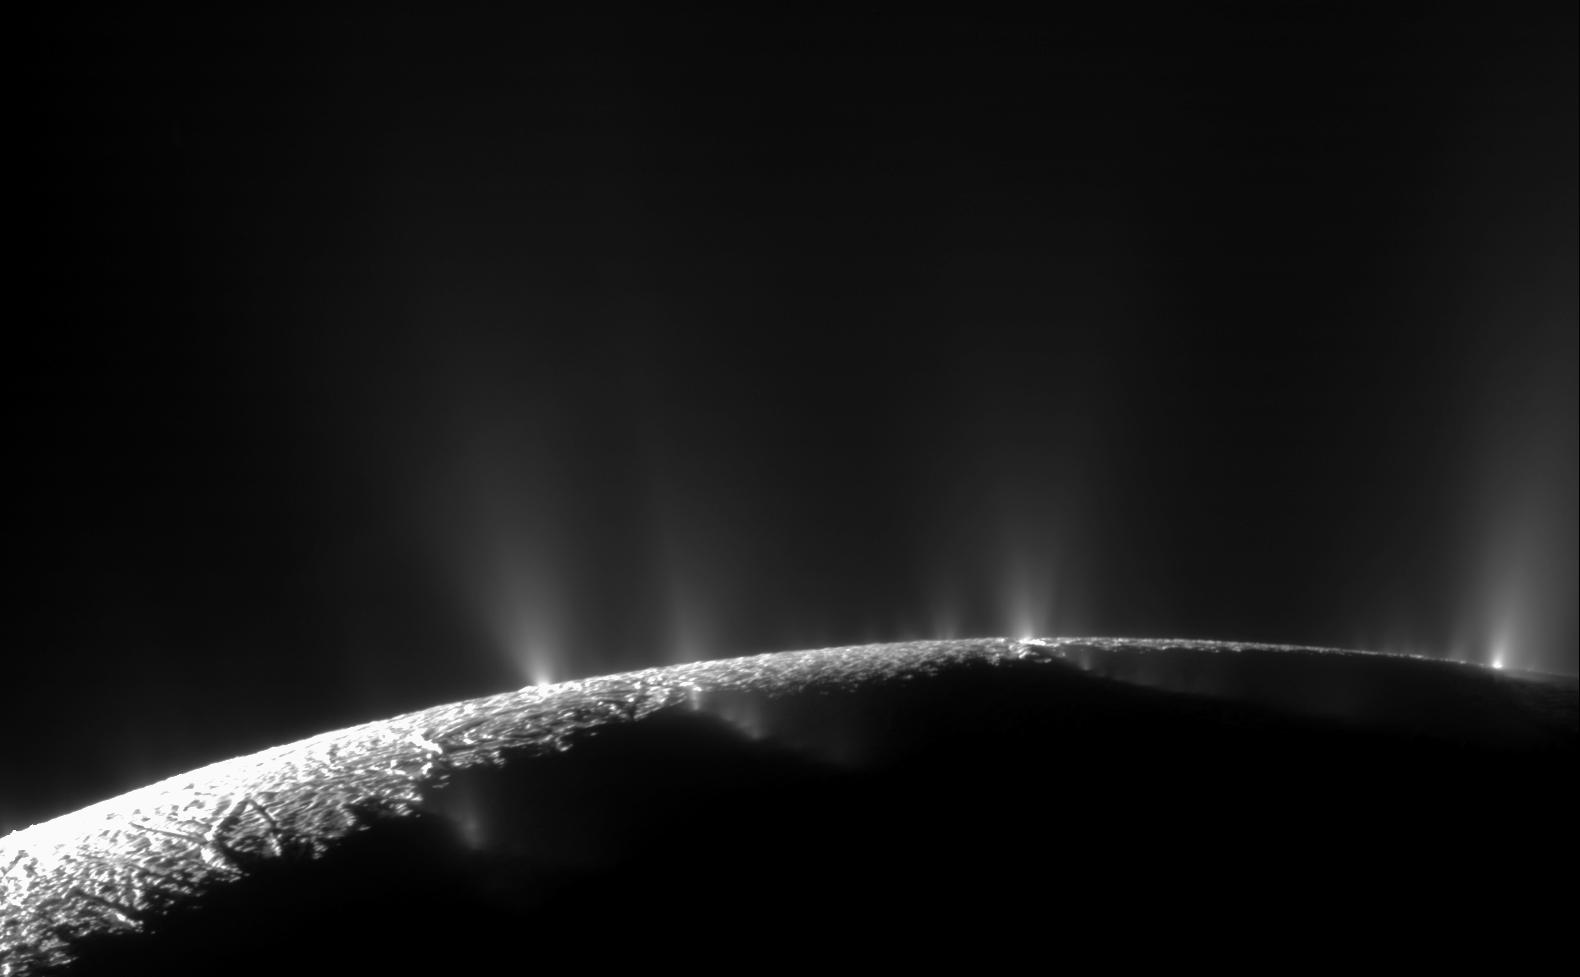 Fountains of ice erupt from the surface of Enceladus. The small moon is mostly in shadow, which makes the geysers illuminated by sunlight stand out.